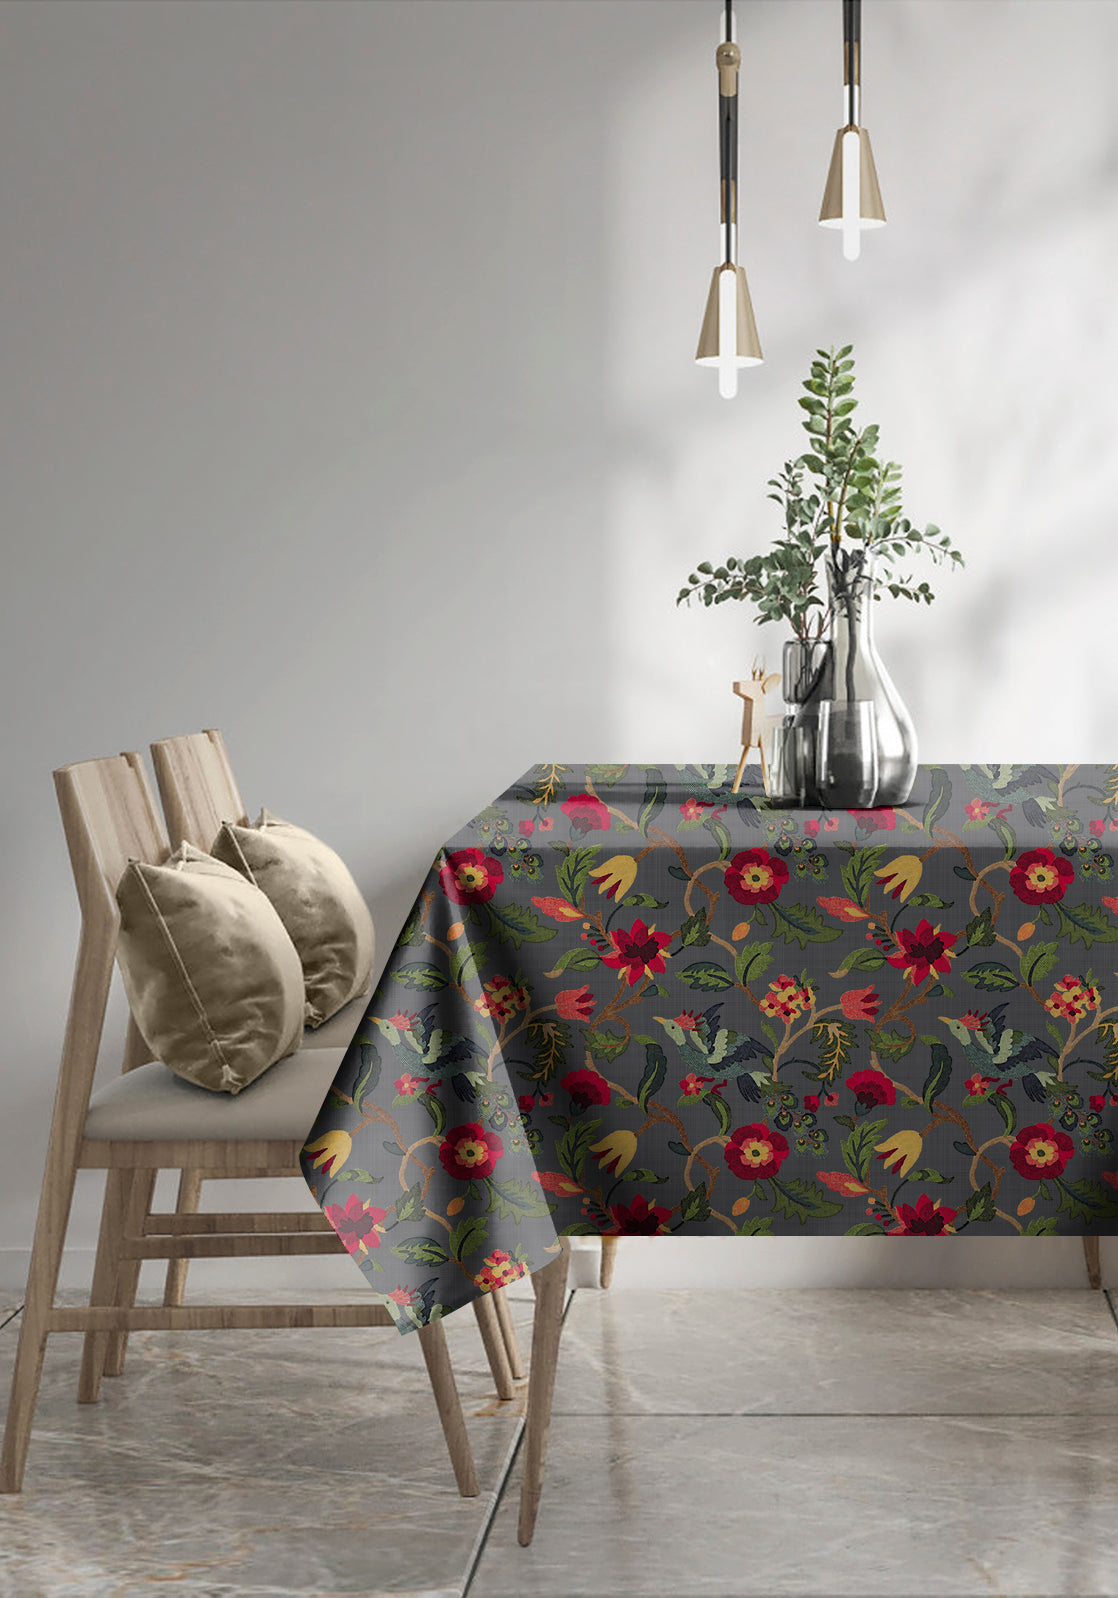 Cabal Space Grey 6 Seater Table Cloth